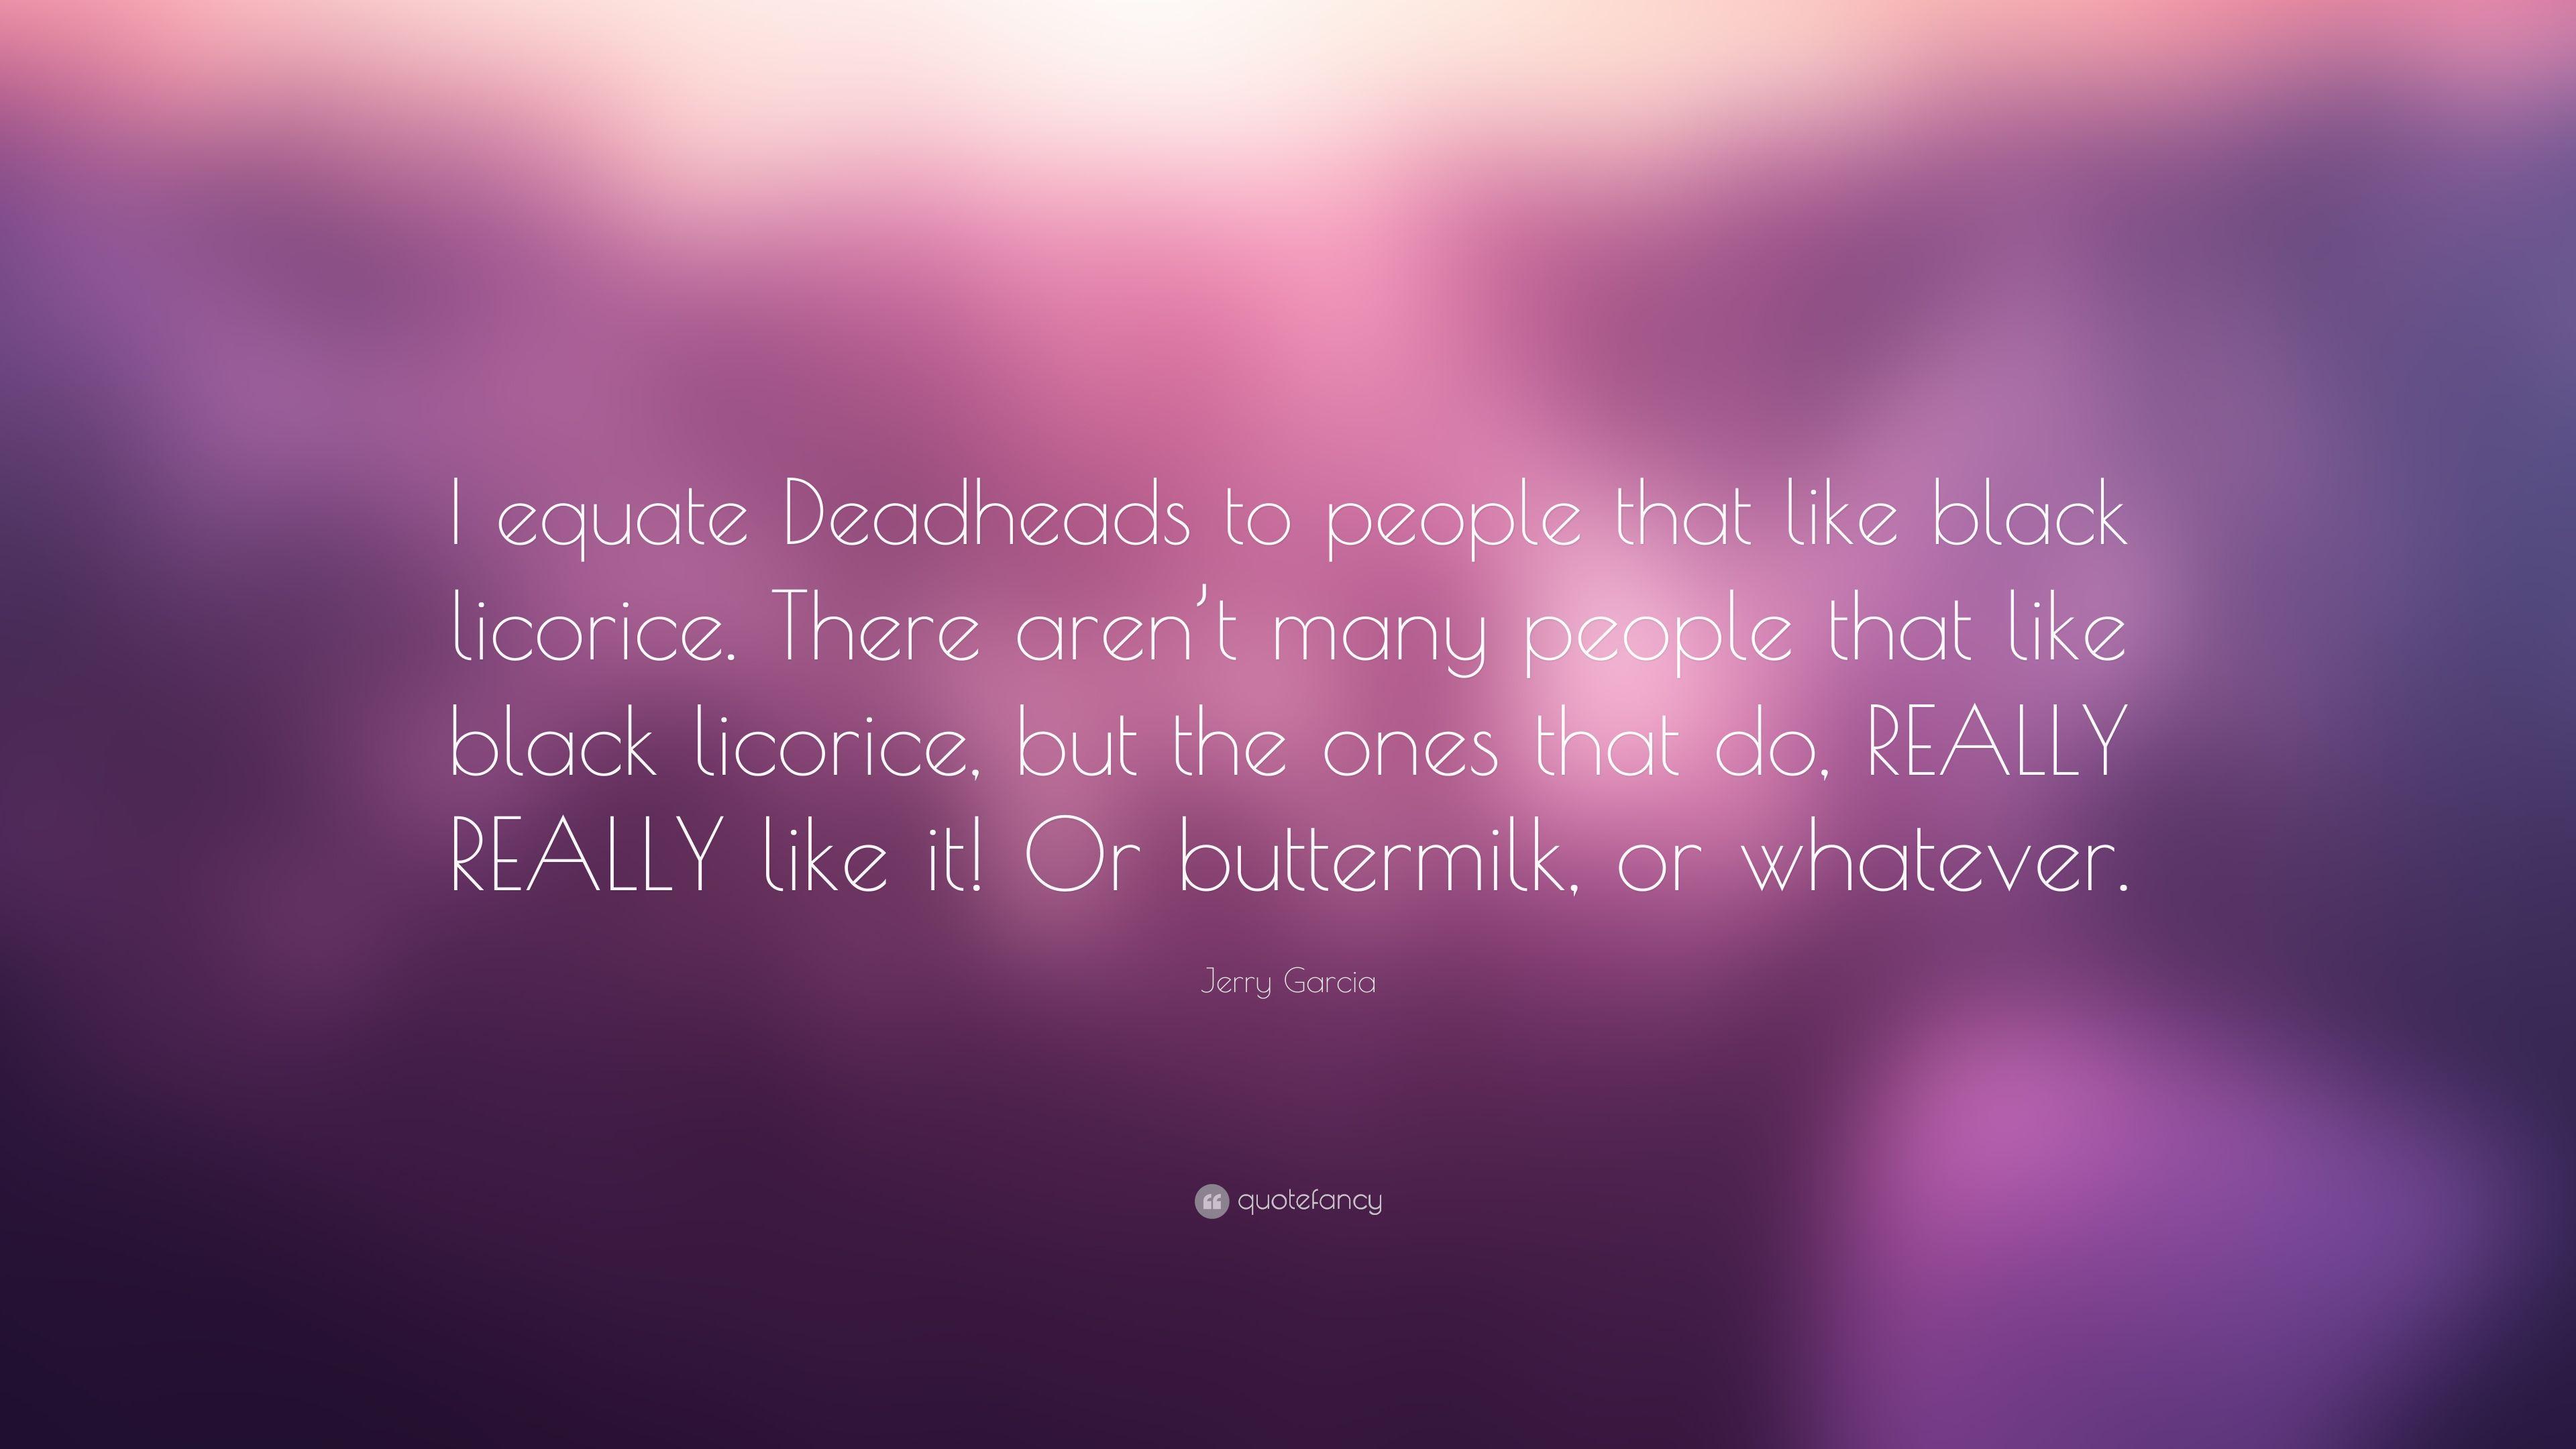 Jerry Garcia Quote: “I equate Deadheads to people that like black